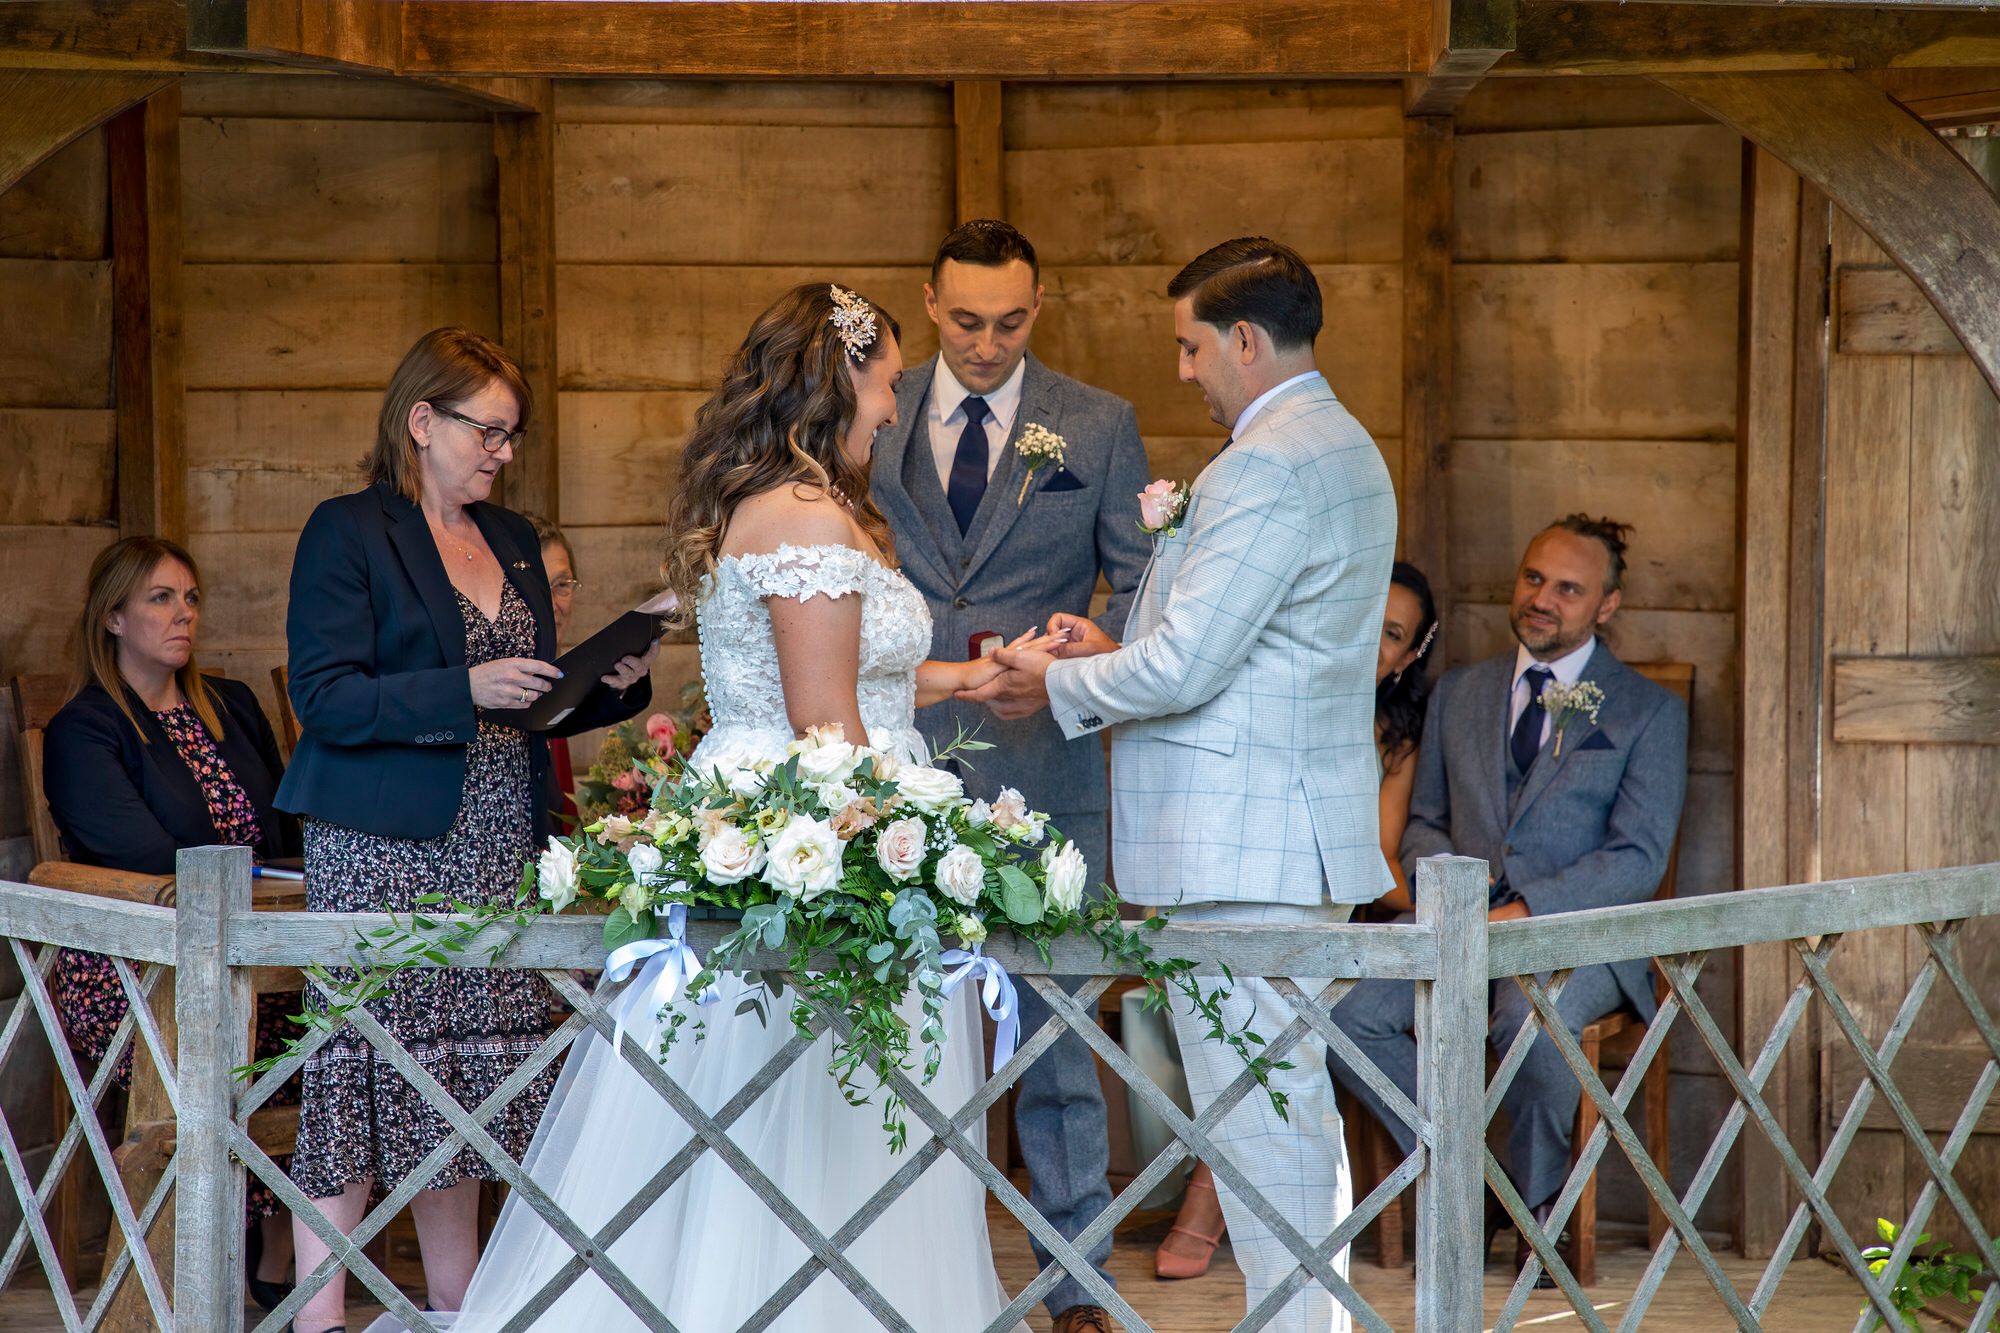 Joanna and Rafal exchanging wedding rings in the Summer House at South Farm in Cambridgeshire. Photo thanks to Nigel Charman Photography. 